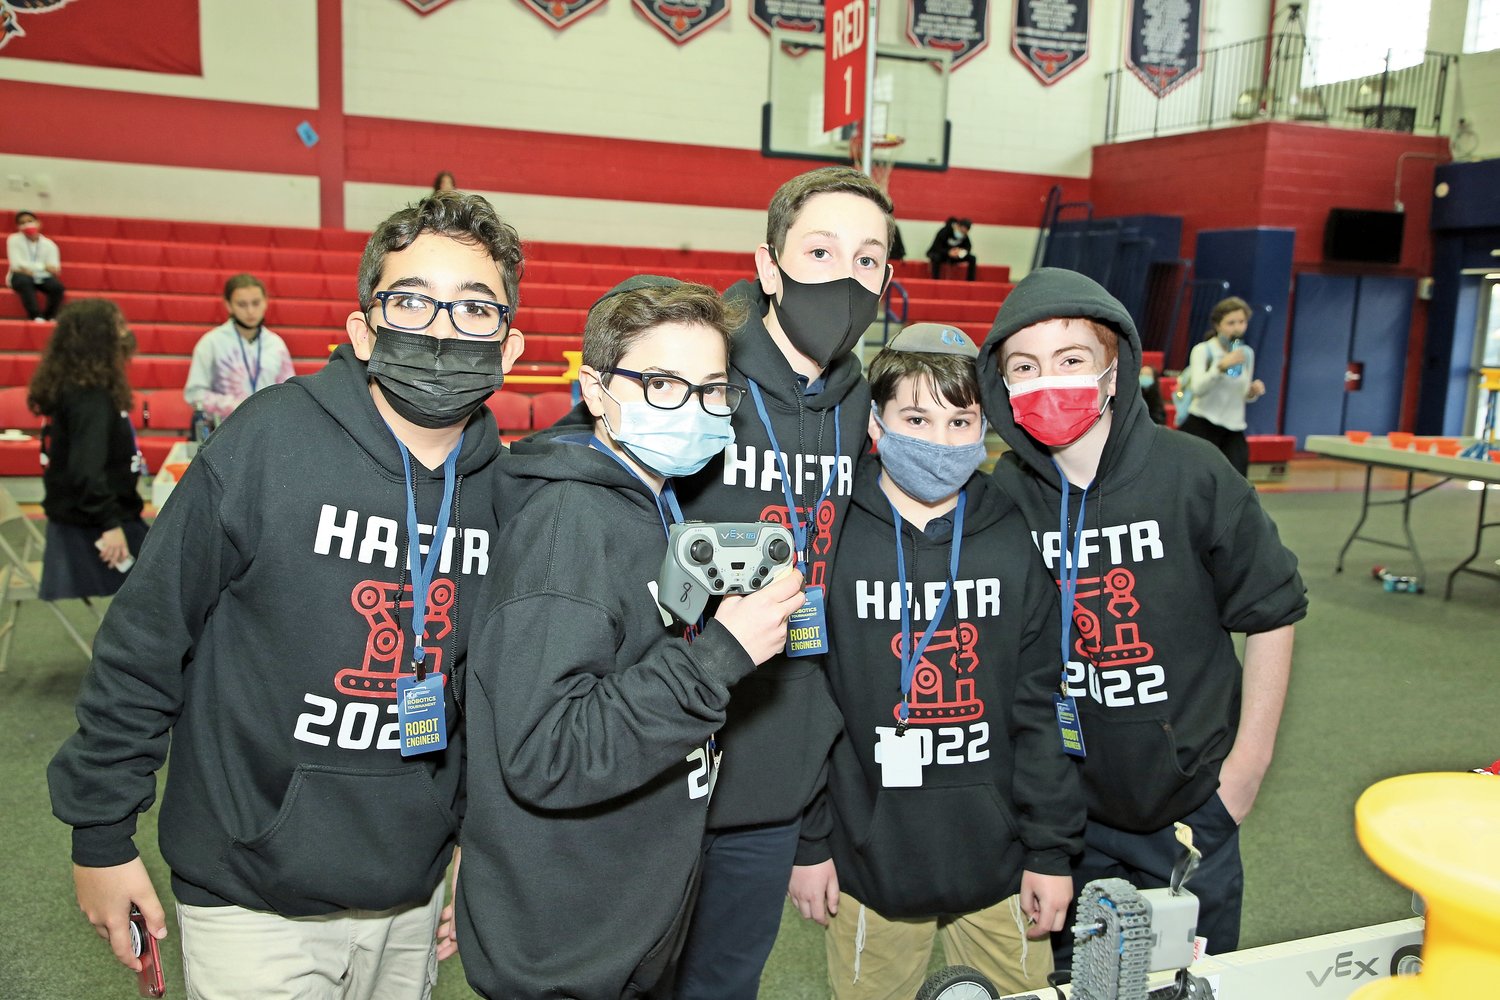 HAFTR Middle School’s robotics teams dominated the competition at the Center for Initiatives in Jewish Education Robotics Tournament in December. From left were students Jack Ymar, Akiva Cunningham, Zachary Straus, Aiden Dworetsjy and Joe Walls.